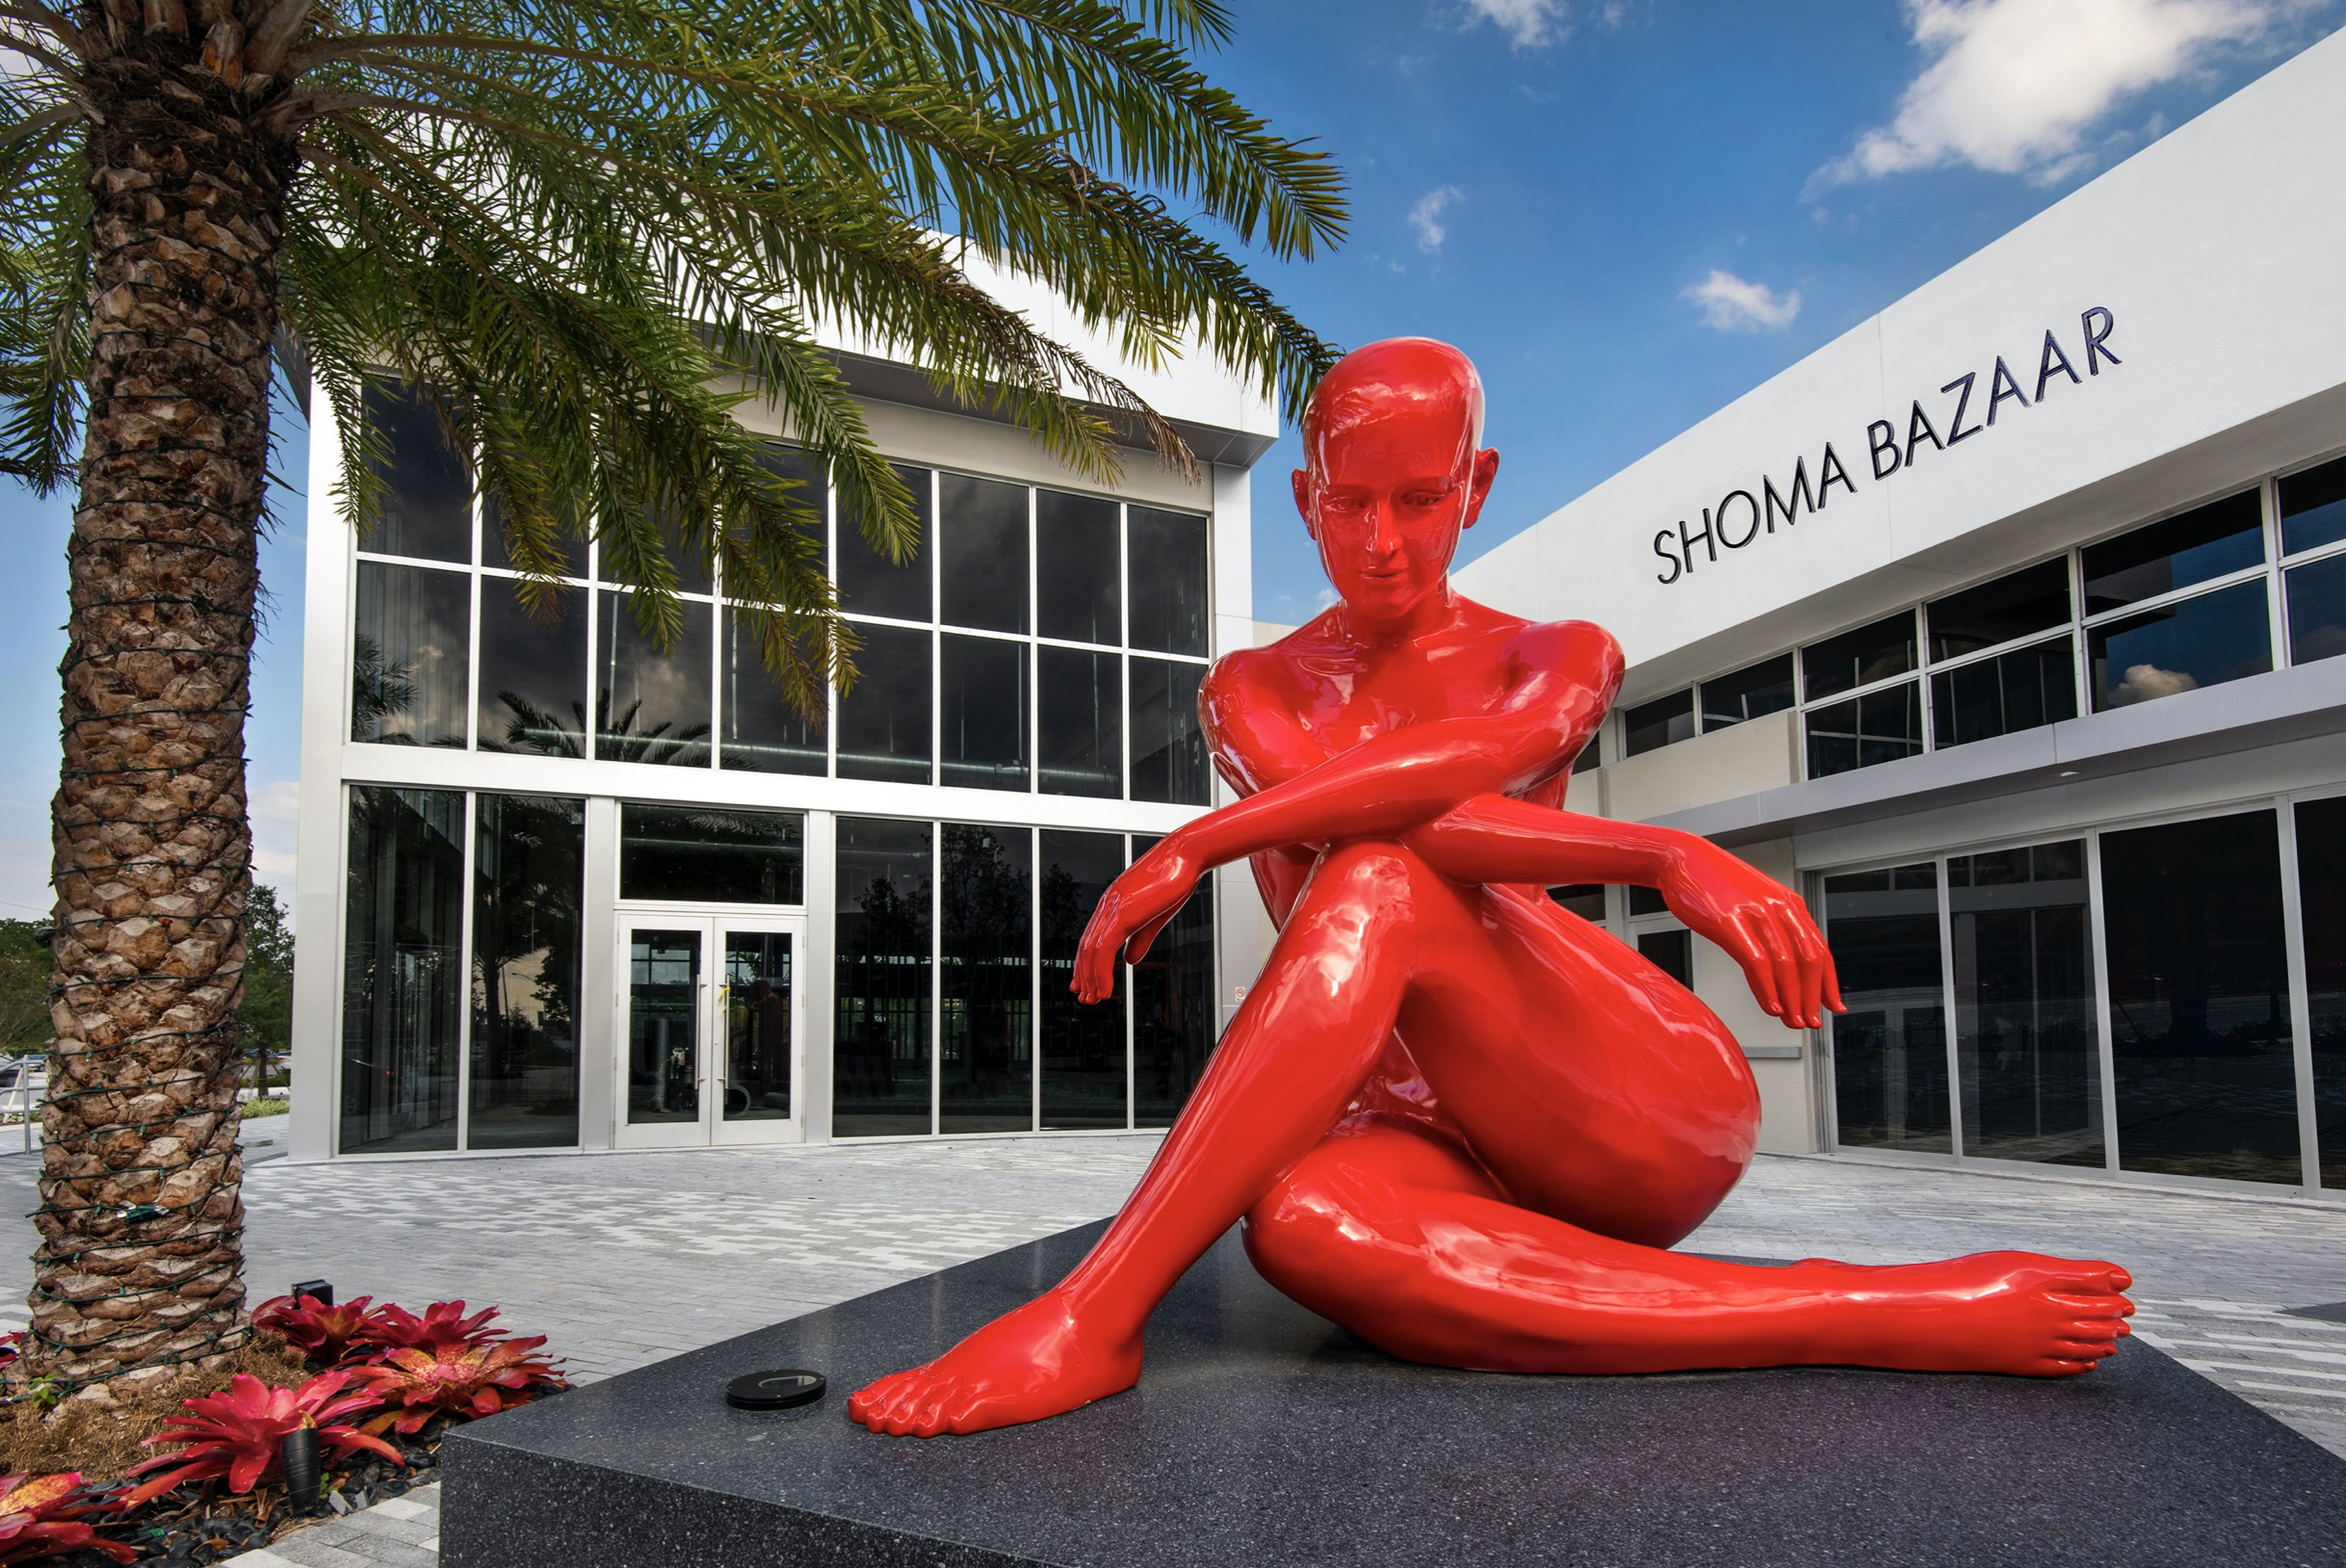 red statue in front of building.